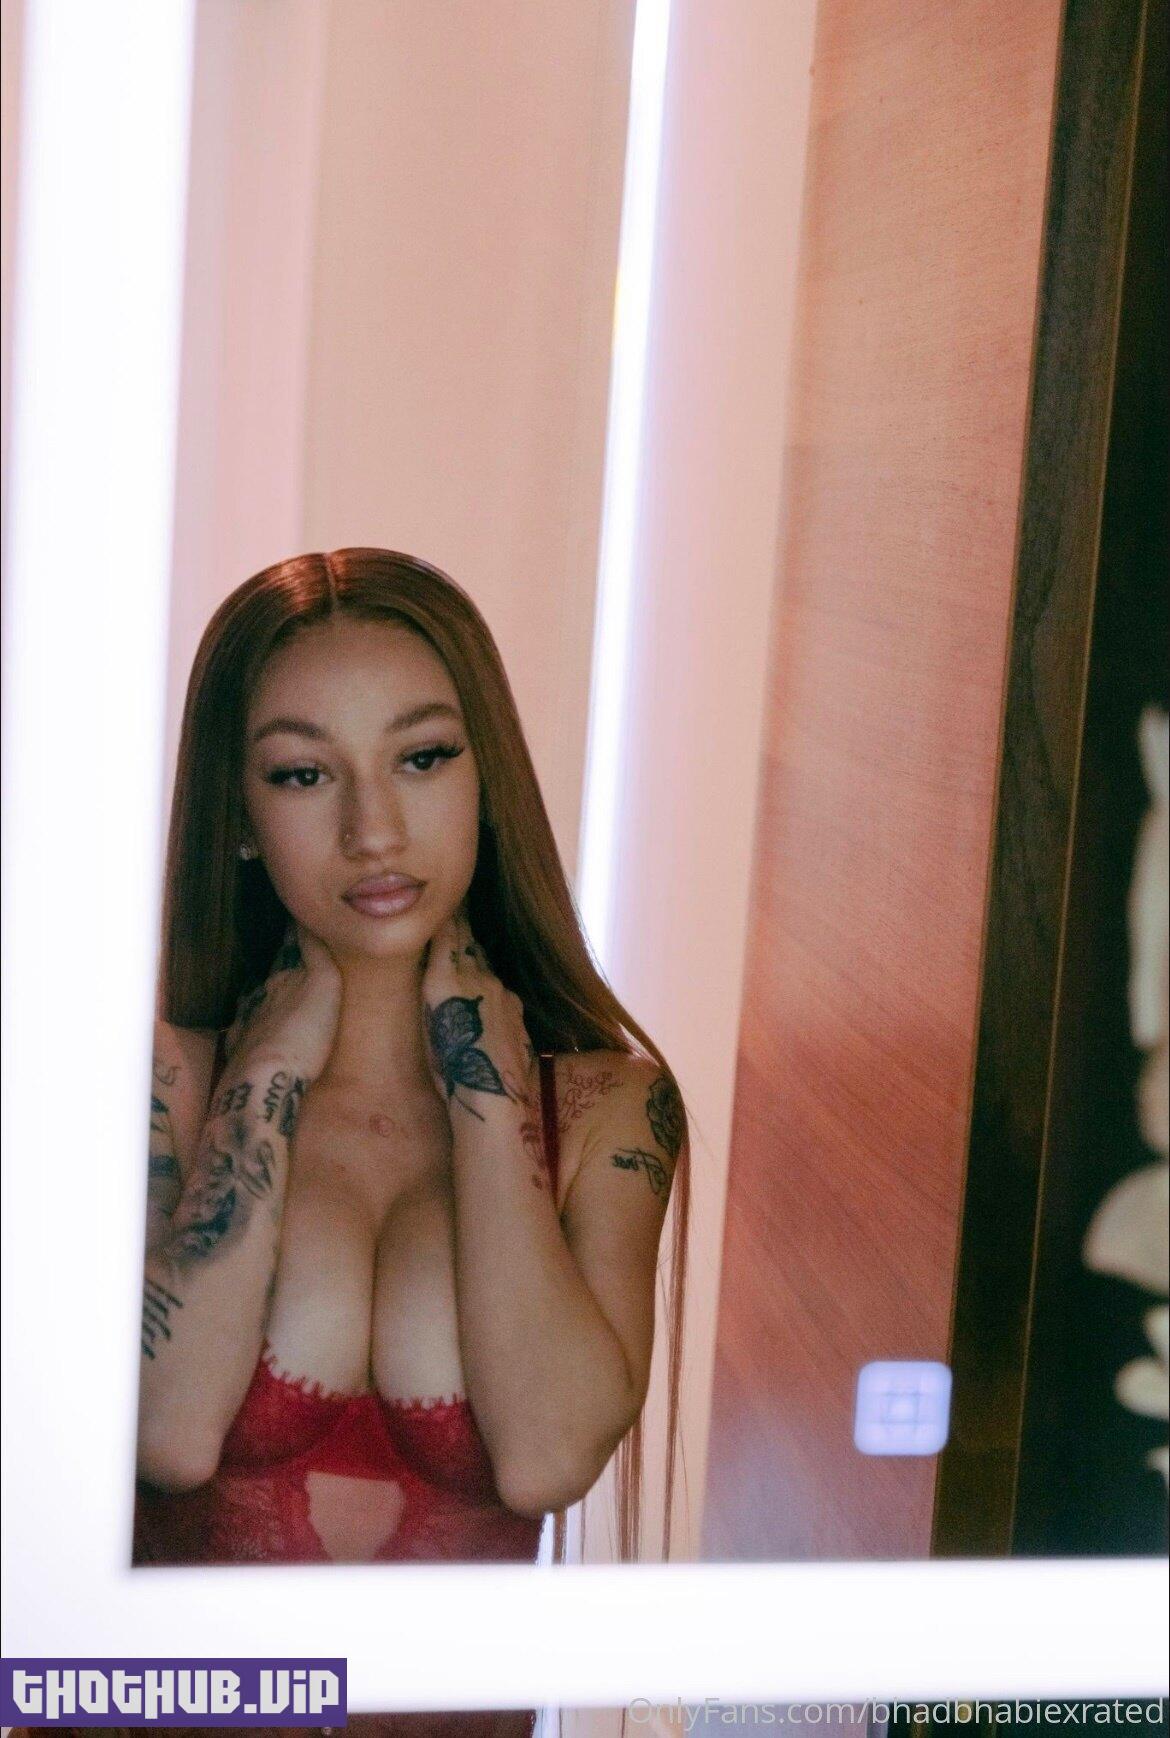 Bhad Bhabie X Rated Onlyfans Nude Lingerie Set Leaked